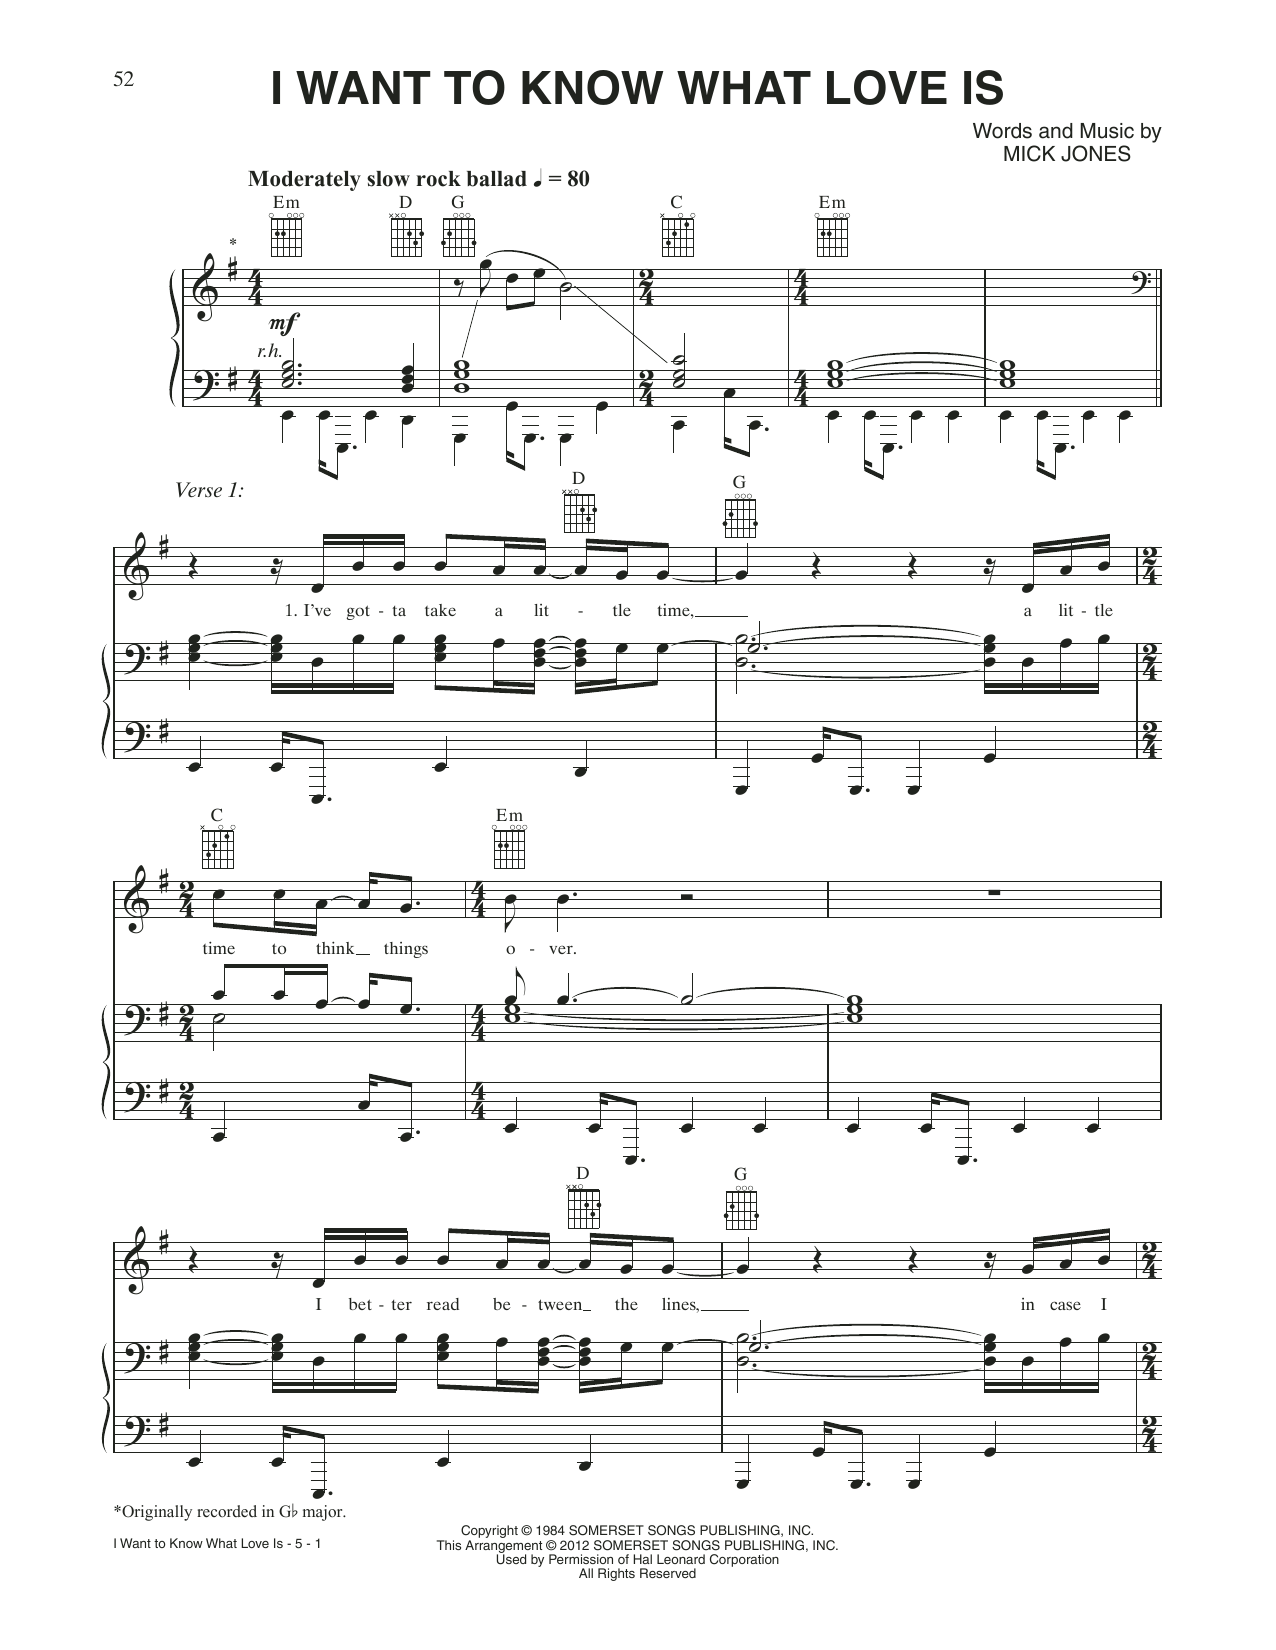 Download Tom Cruise and Malin Akerman I Want To Know What Love Is (from Rock Sheet Music